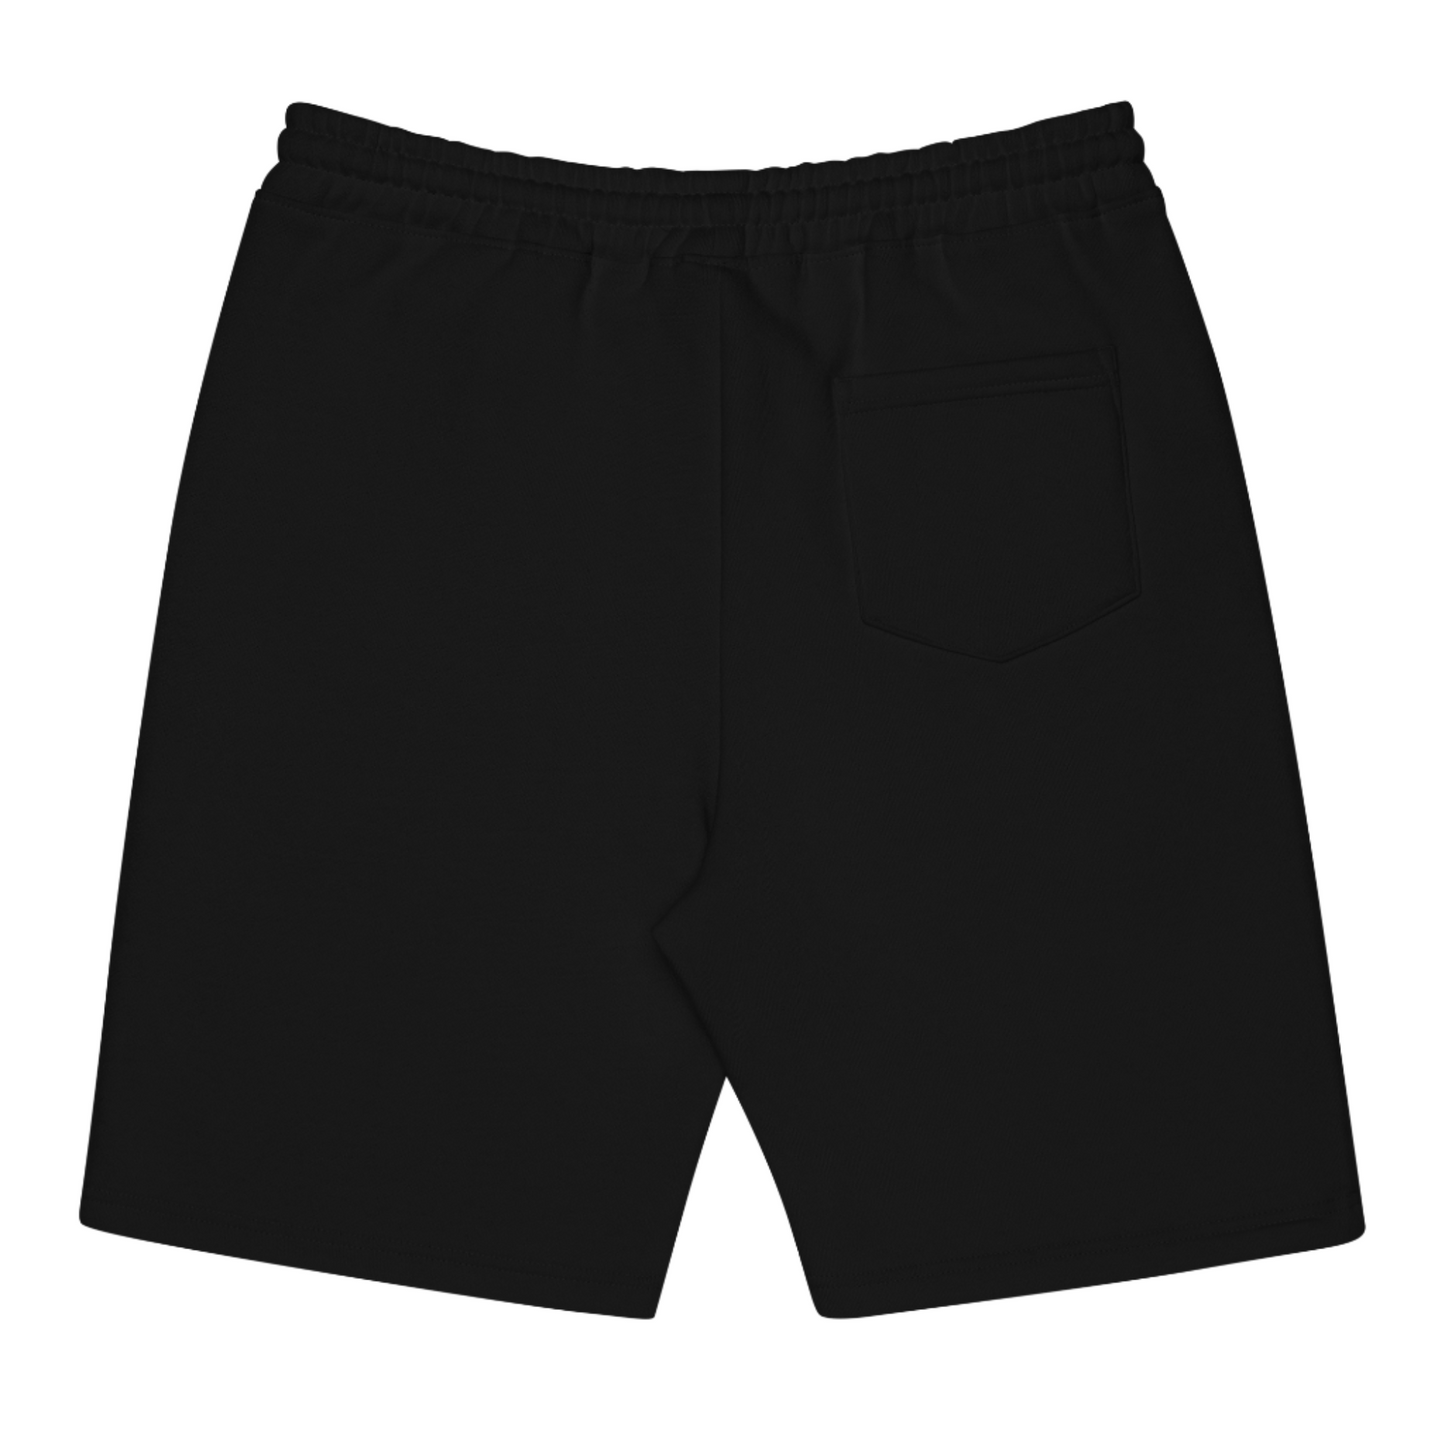 OUT OF SEASON Embroidered Logo Fleece Shorts (Ships Separately)